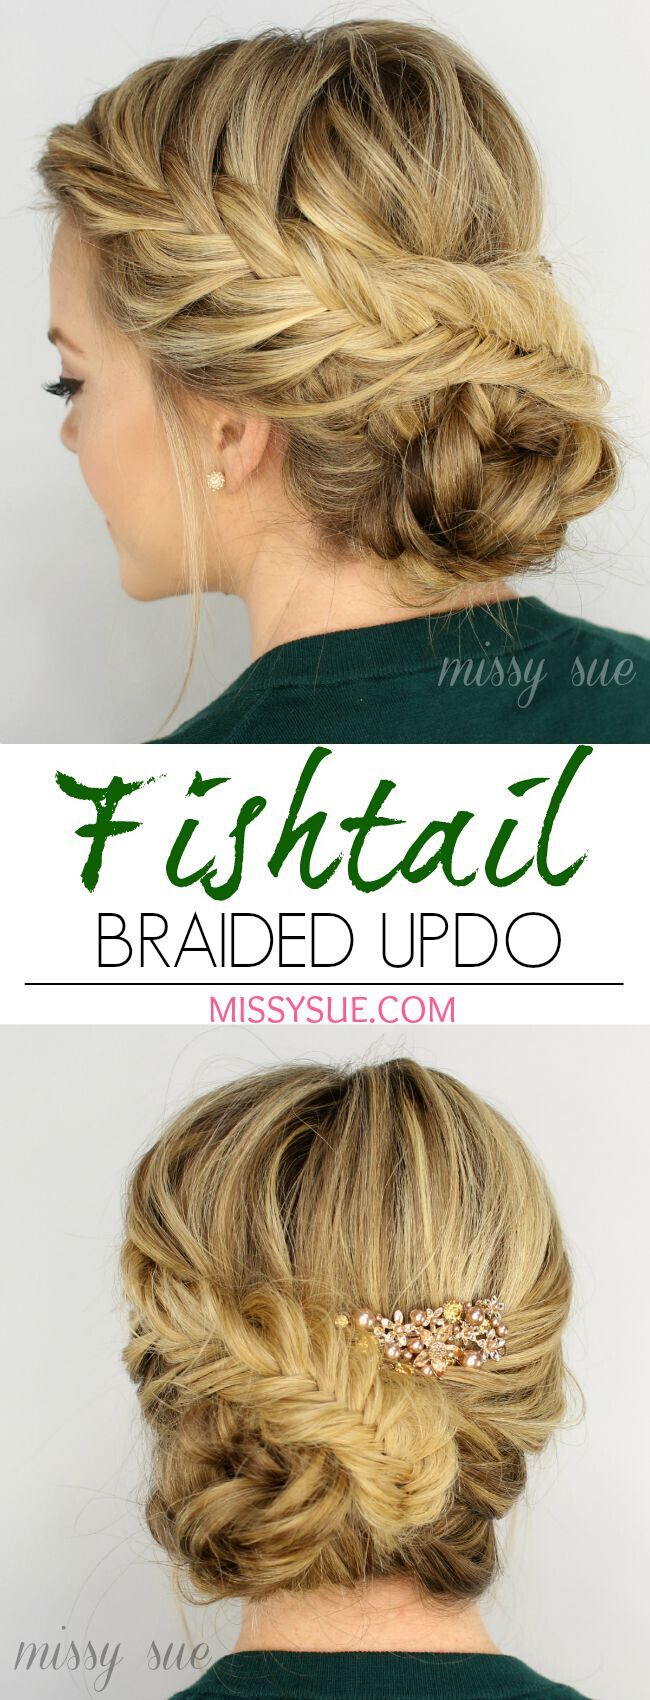 French Fishtail Braided Updo for Blonde Long Hair